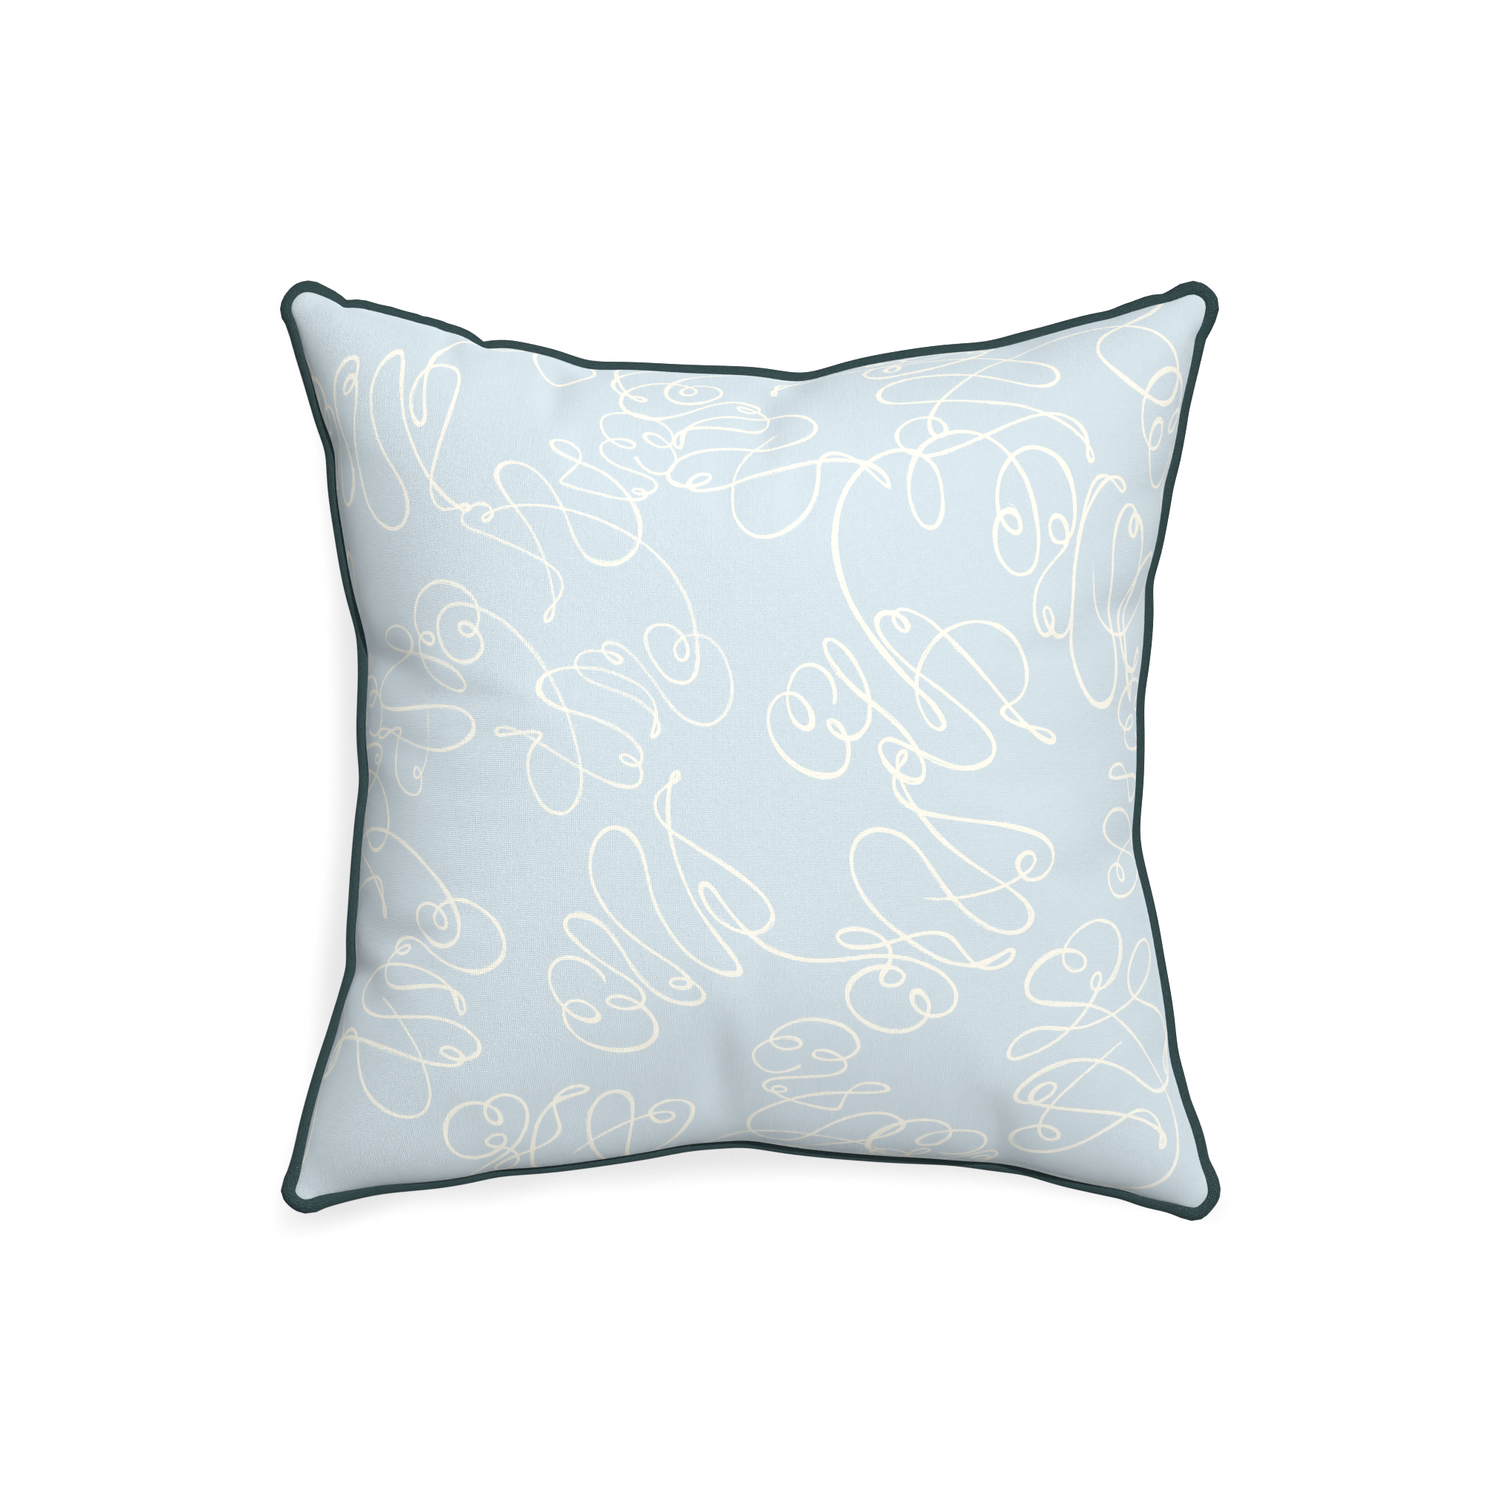 20-square mirabella custom powder blue abstractpillow with p piping on white background